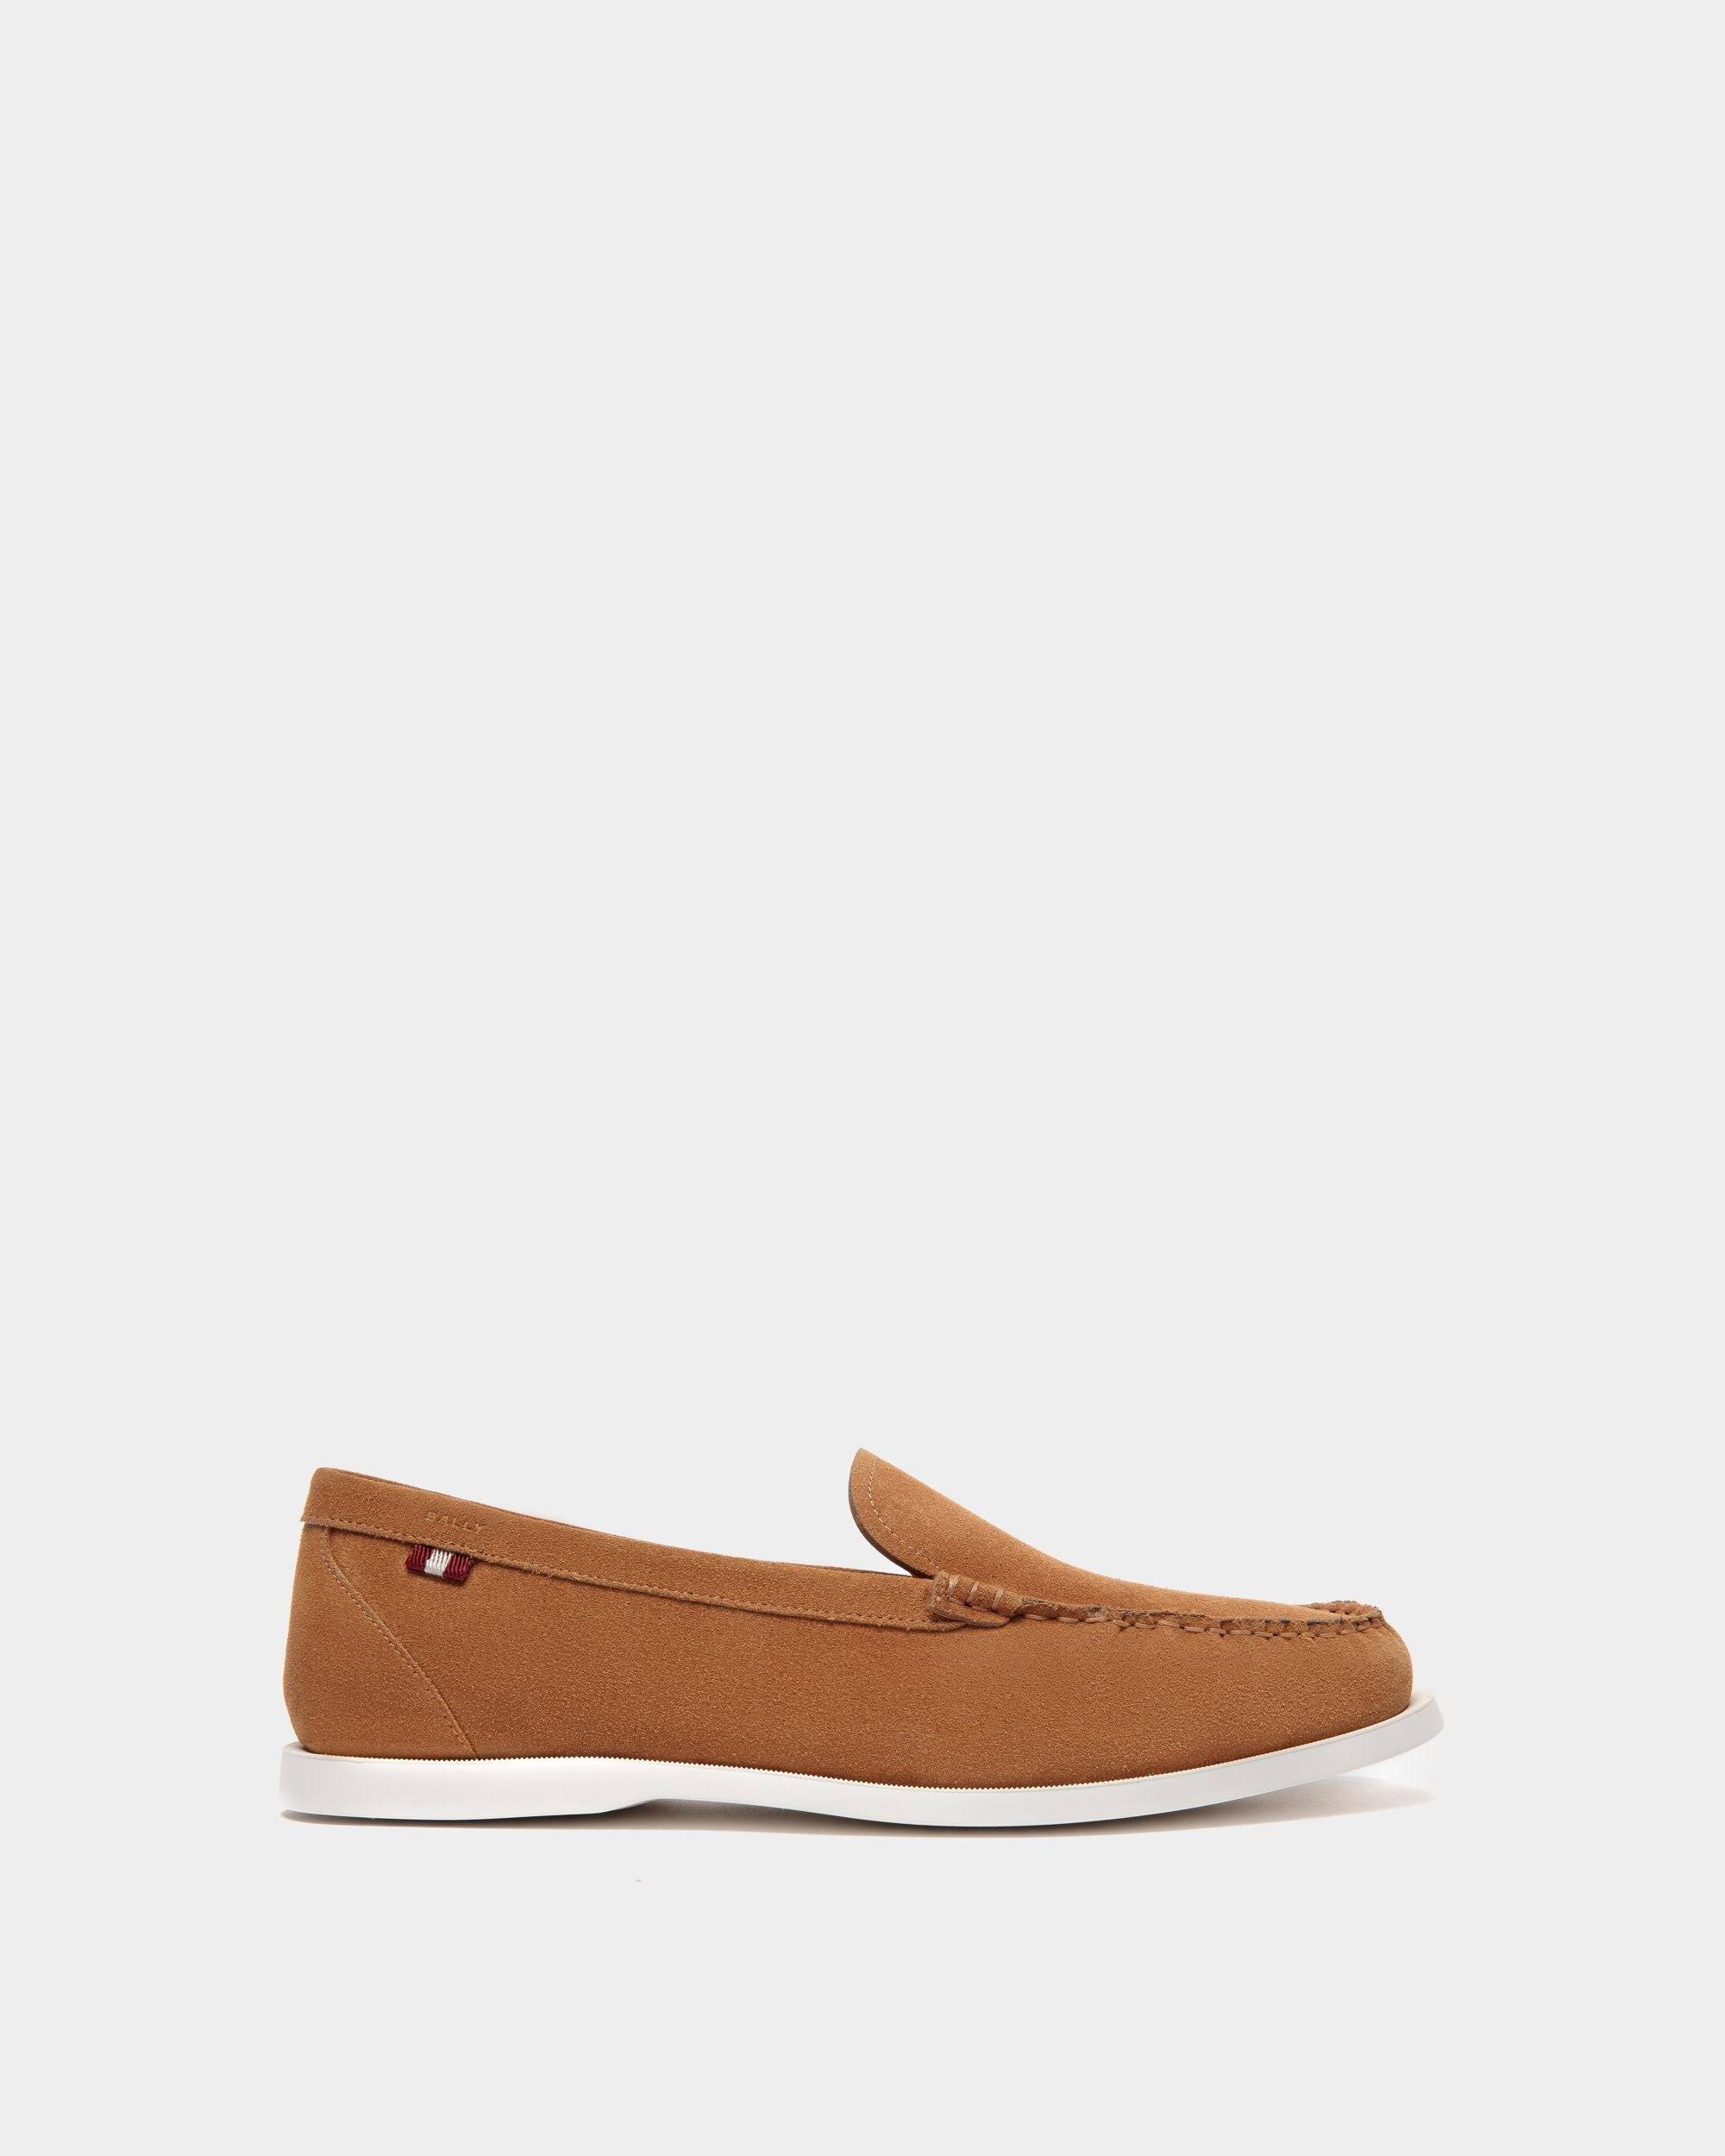 Men's Nelson Loafer in Suede | Bally | Still Life Side